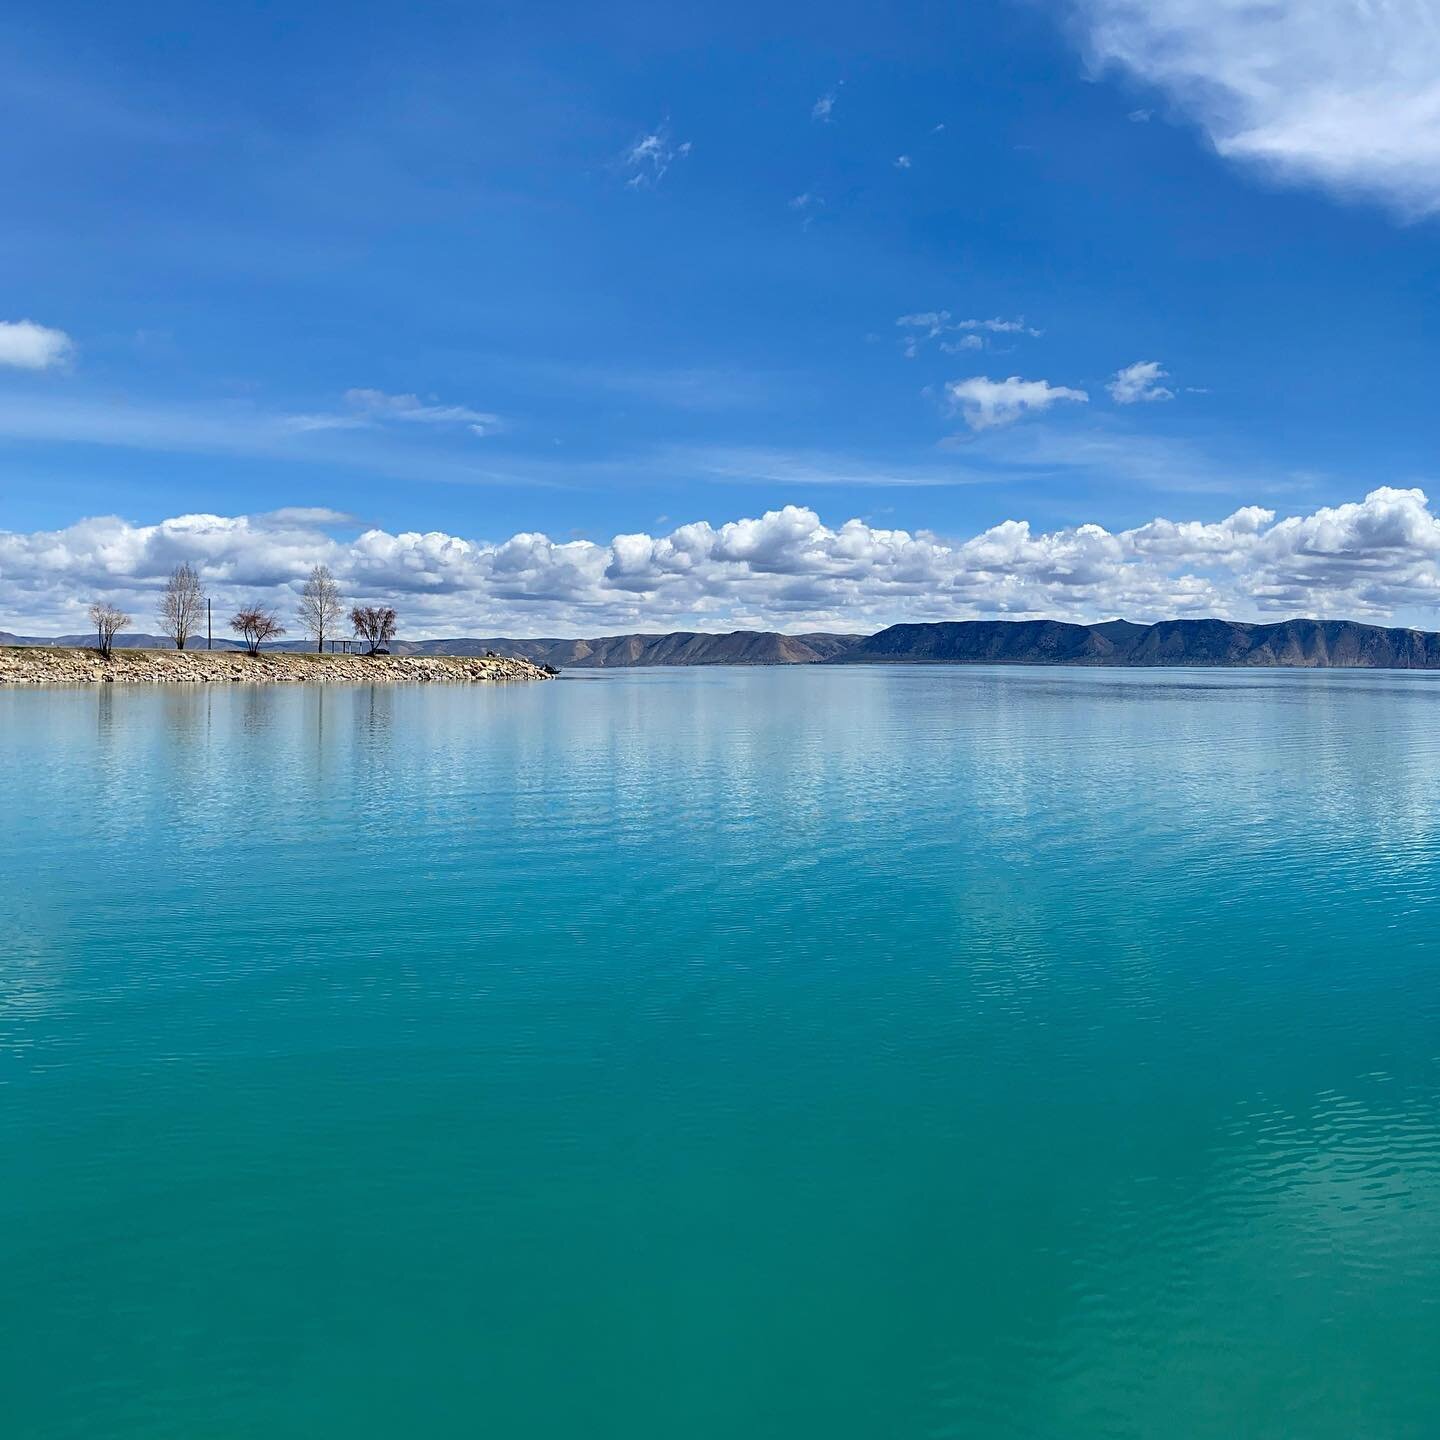 The Caribbean of the North 🥶 but much colder. Now if only it could be this smooth and calm all the time...and warmer please ☀️ #bearlake #utah #panorama #earth #nature #lake #water #color #spring #happyplace